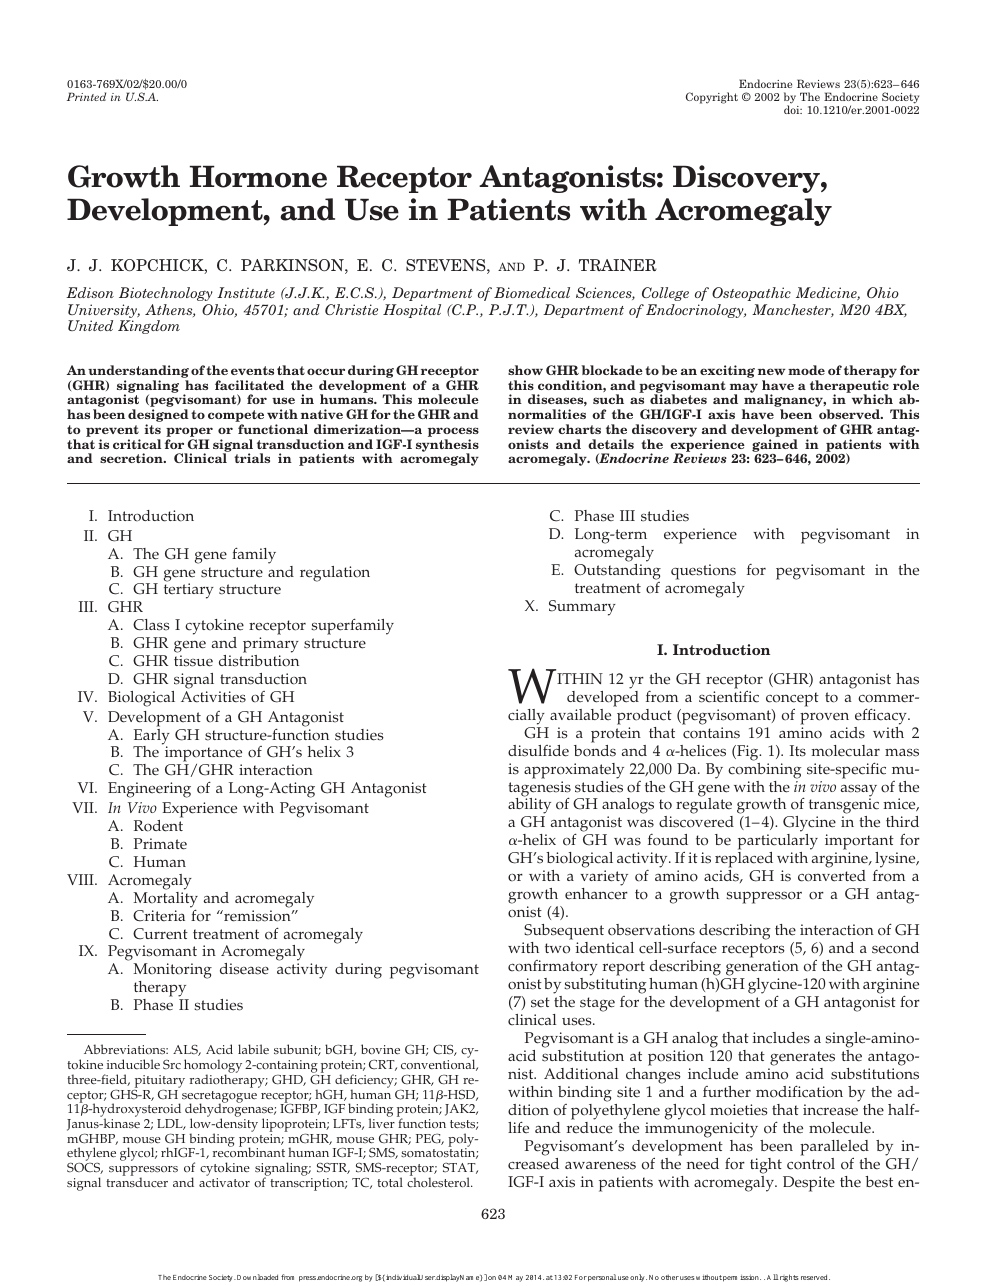 Growth Hormone Receptor Antagonists Discovery Development And Use In Patients With Acromegaly Topic Of Research Paper In Basic Medicine Download Scholarly Article Pdf And Read For Free On Cyberleninka Open Science